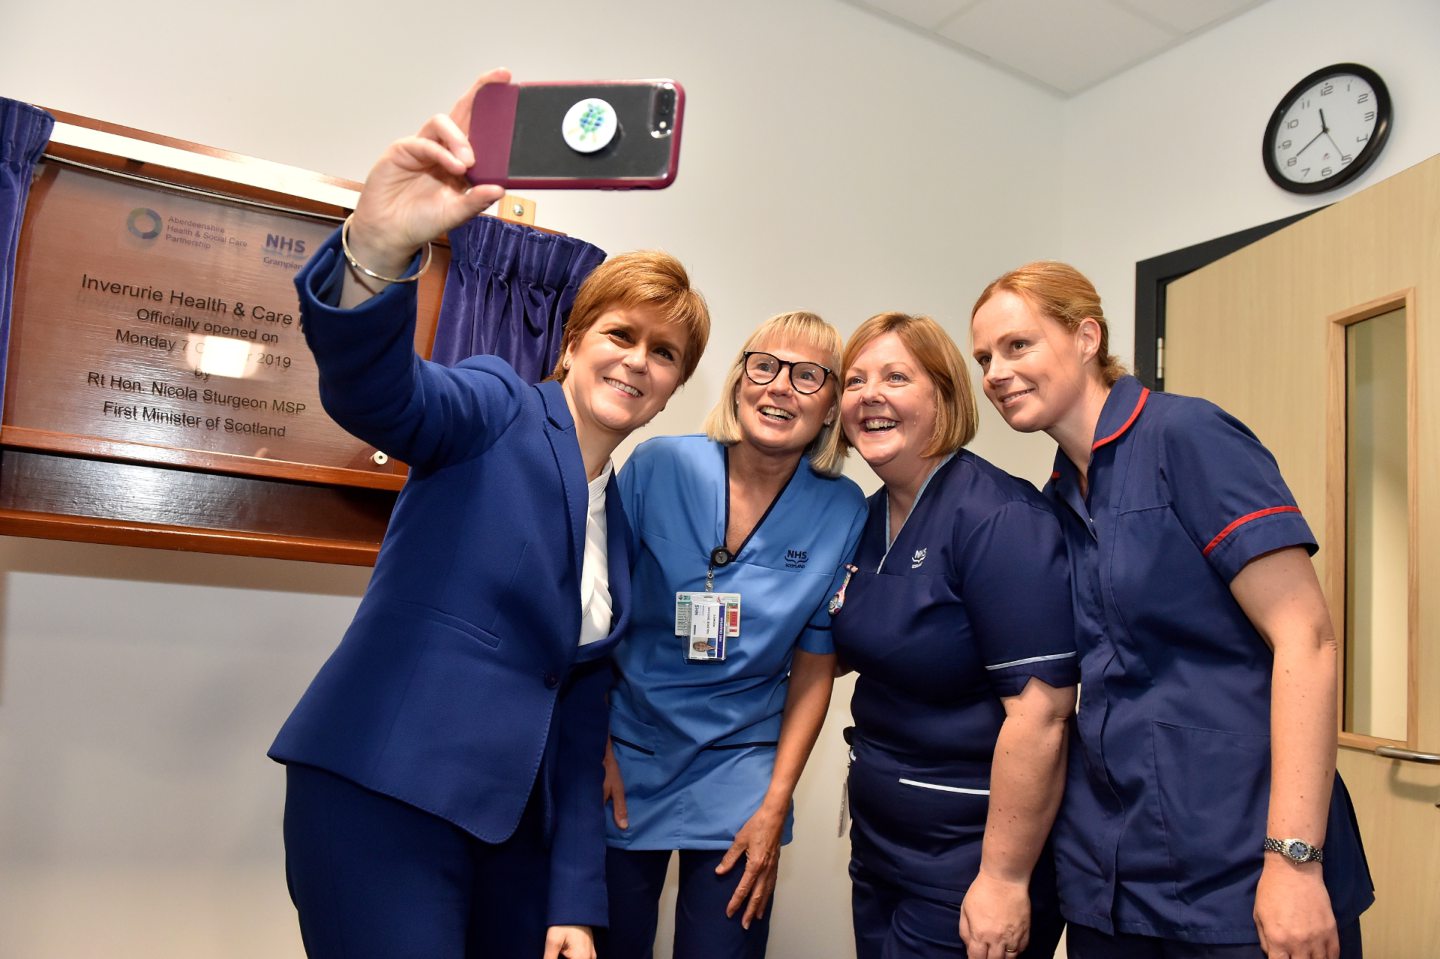 Former First Minister Nicola Sturgeon visited Inverurie Health and Social Care Hub, where the medical practice is based, in 2019. Image: Scott Baxter/ DC Thomson.